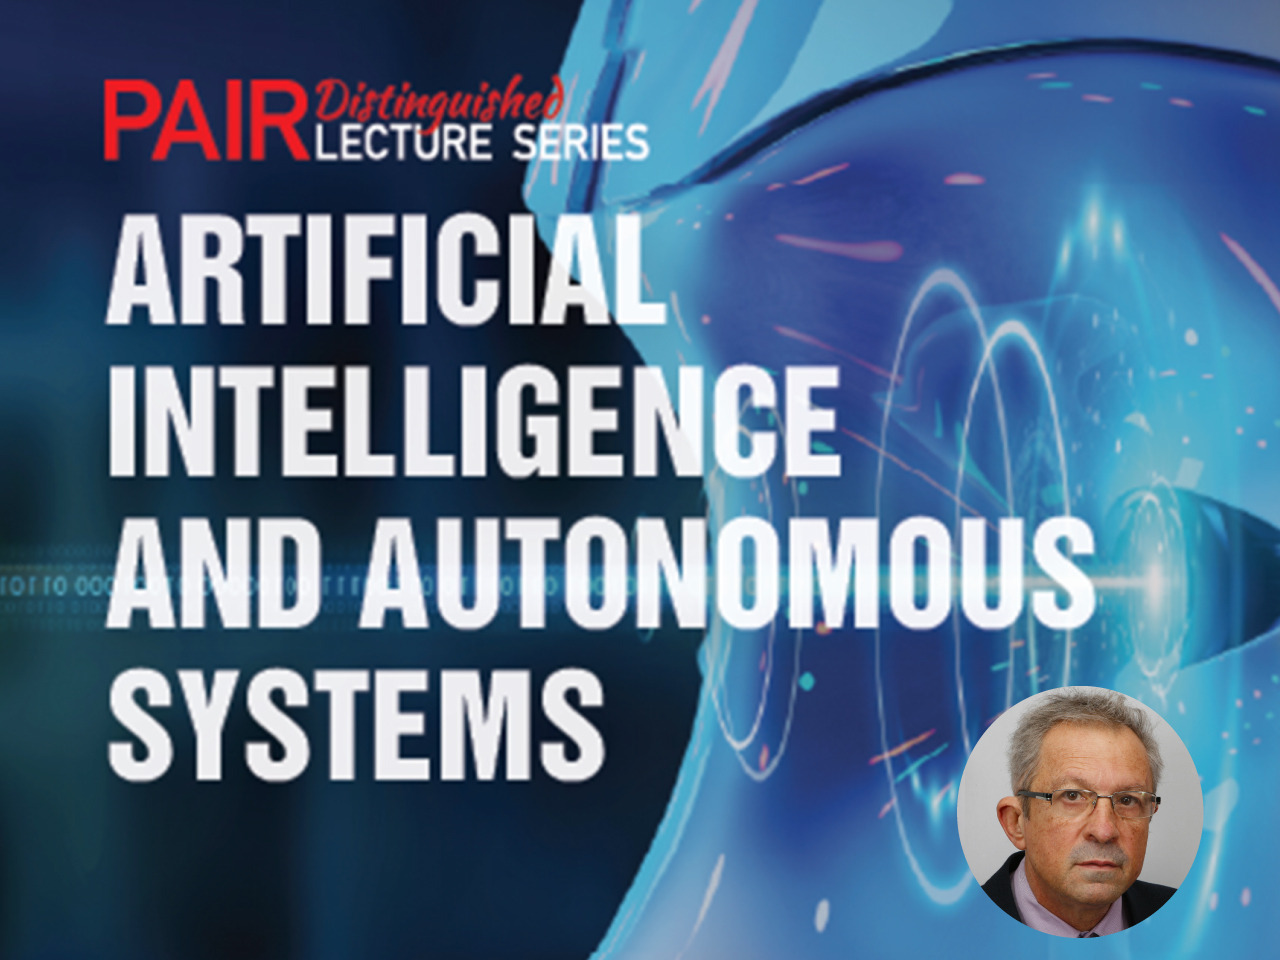 PAIR Distinguished Lecture Series: Artificial intelligence and autonomous systems